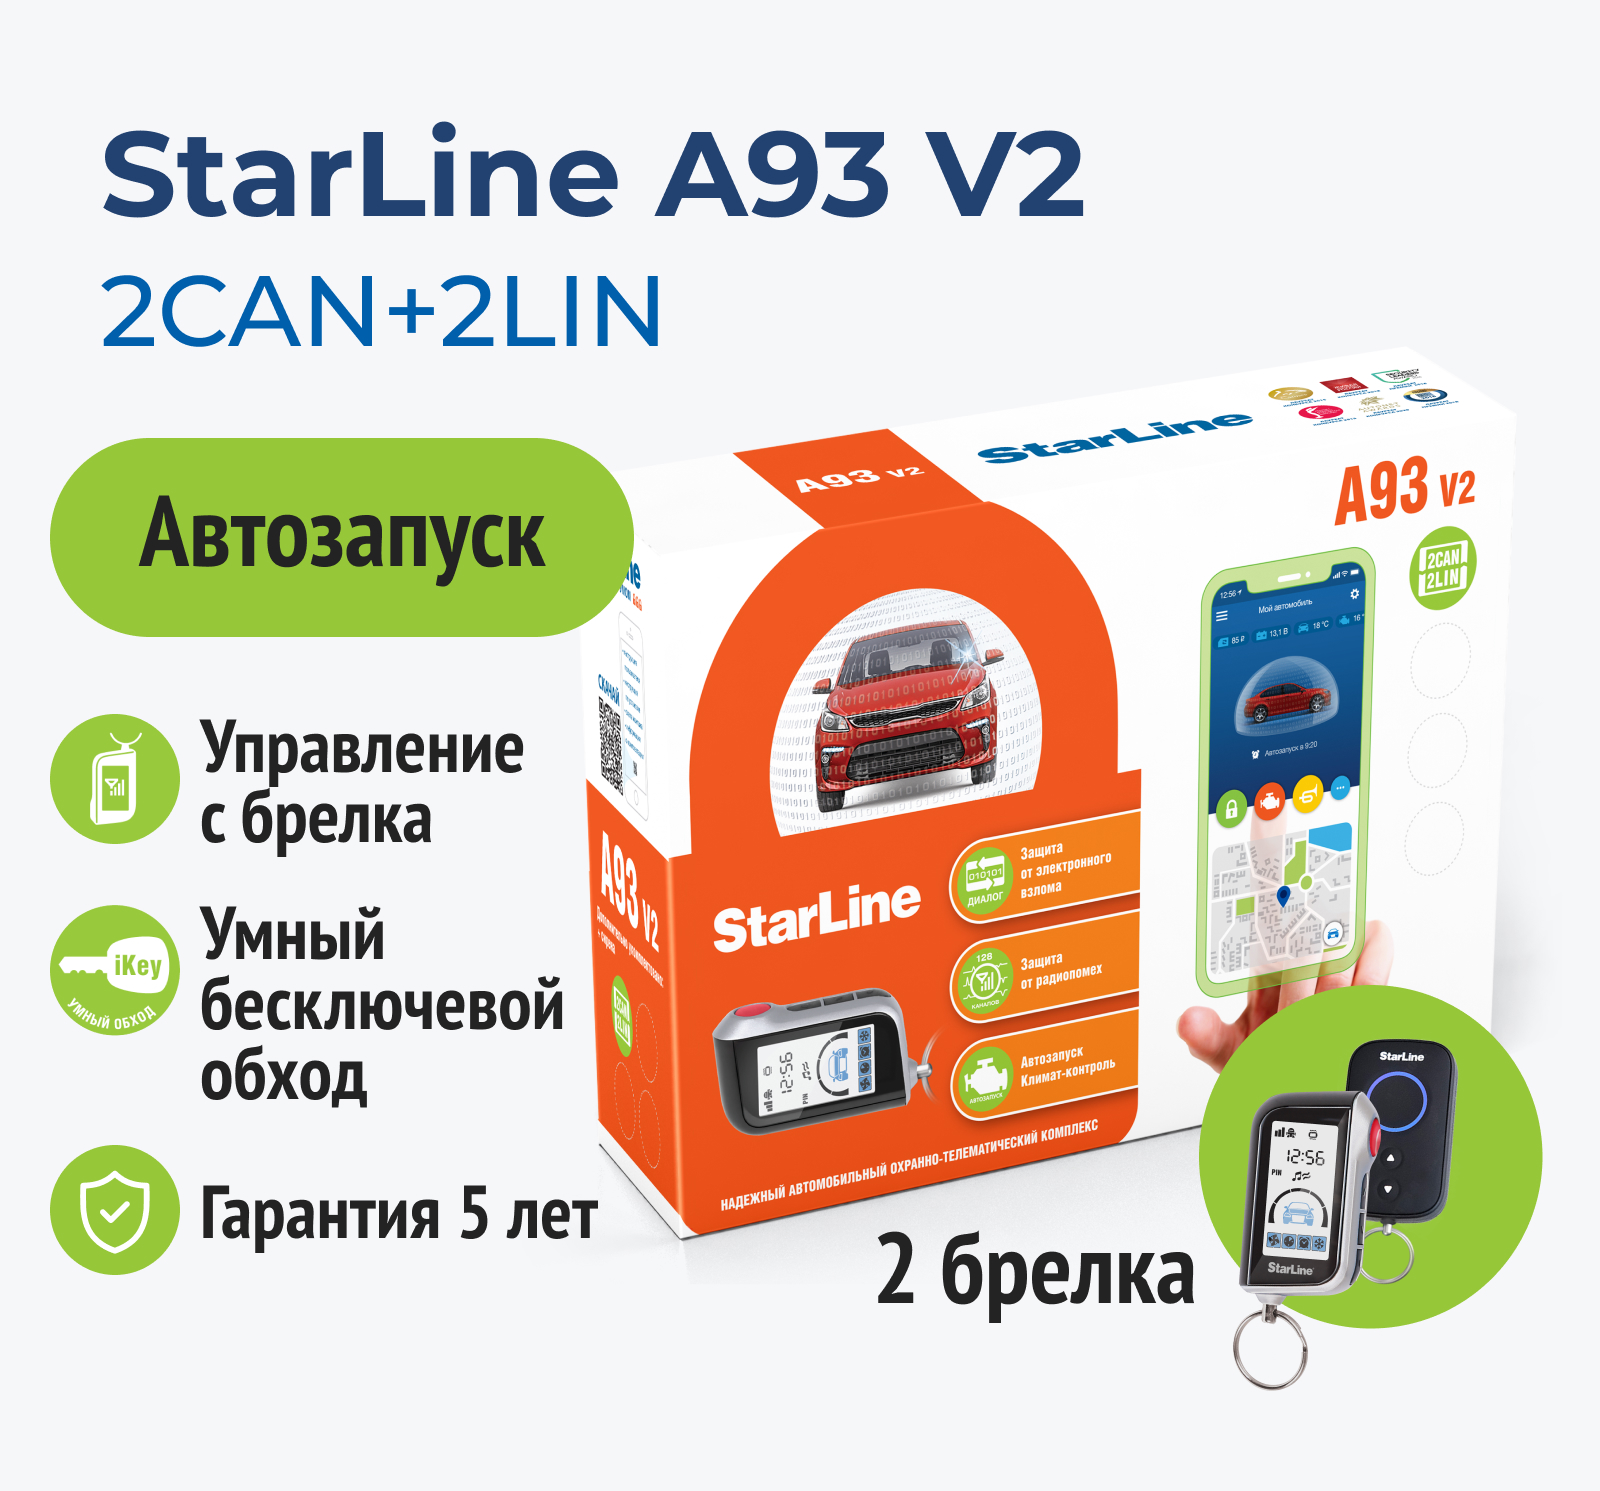 A93 2can 2lin gsm. Старлайн а93 2can 2lin. STARLINE a93 v2 Eco. STARLINE a93 2can+2lin Eco. STARLINE a93 v2 2can+2lin GSM Eco.